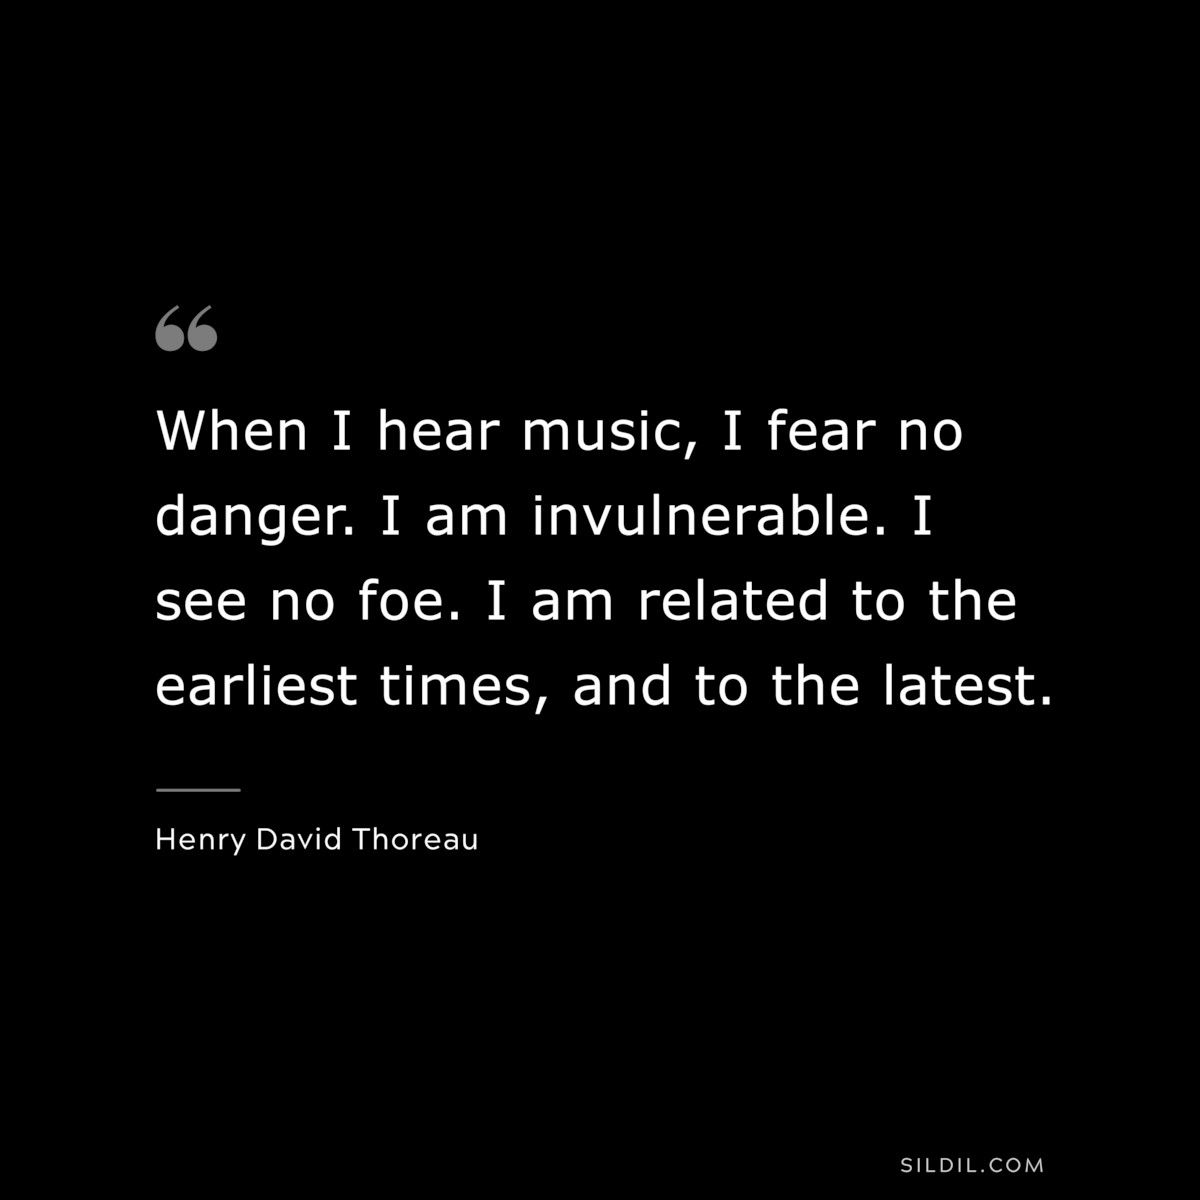 When I hear music, I fear no danger. I am invulnerable. I see no foe. I am related to the earliest times, and to the latest. — Henry David Thoreau